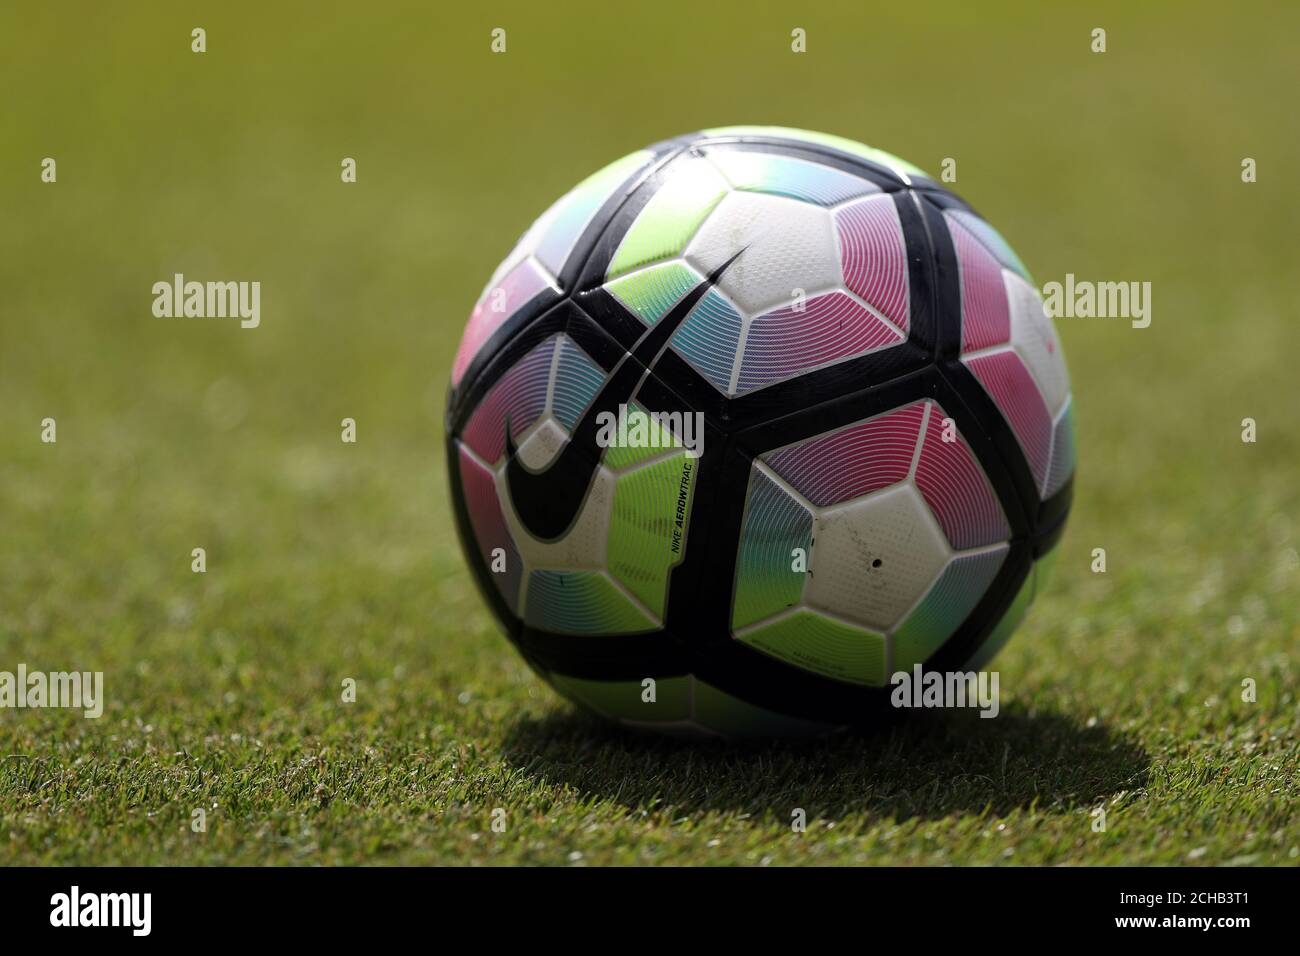 General view of an official Nike Ordem Match ball with the Nike logo on it  Stock Photo - Alamy